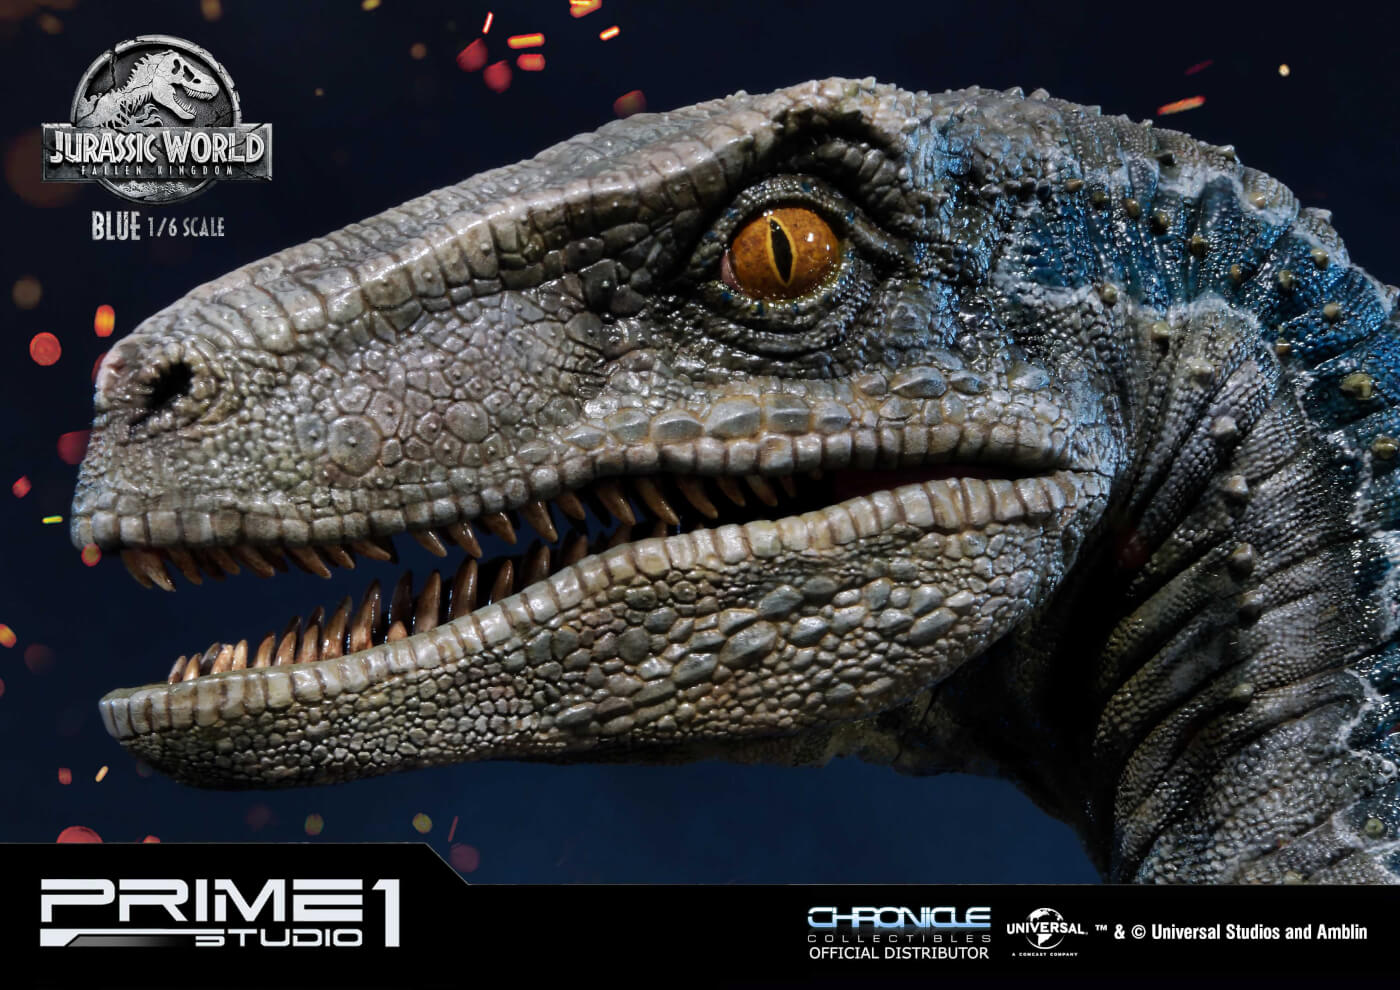 New 1/6 scale ‘Jurassic World’  Blue statue from Prime 1 Studio Now Available to Pre-order!